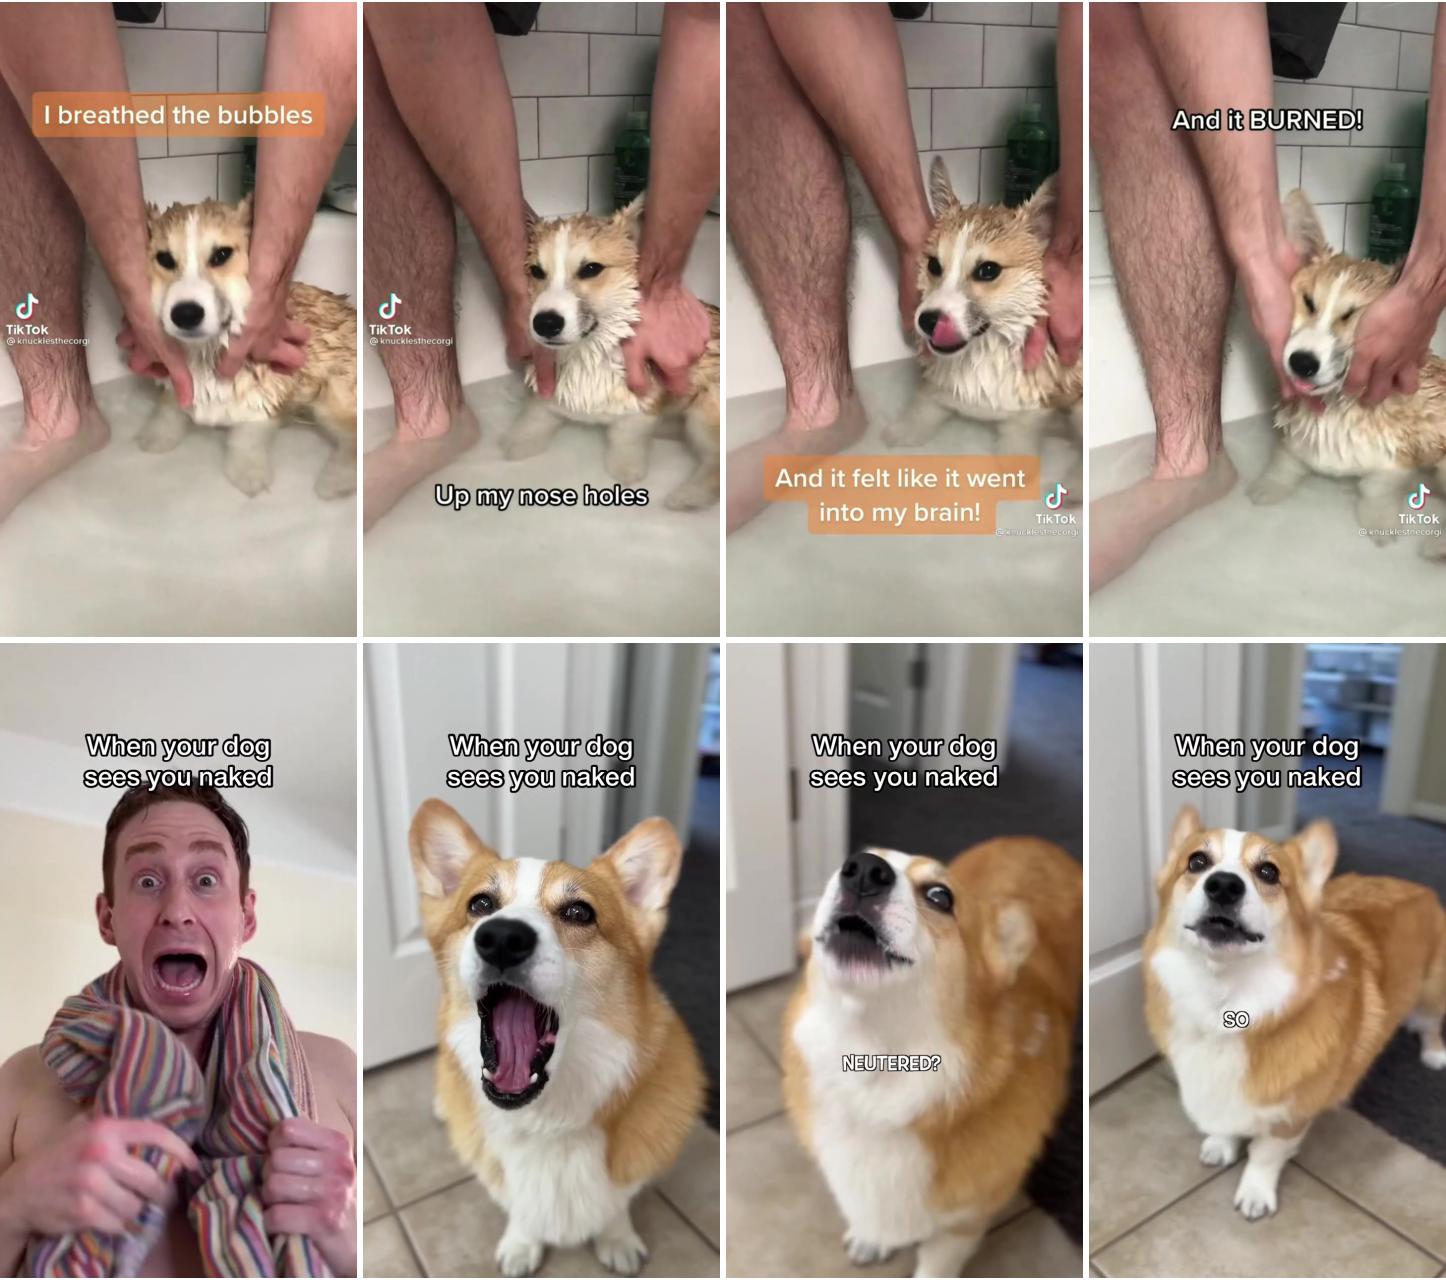 Ouch the bubbles; corgi gets traumatized